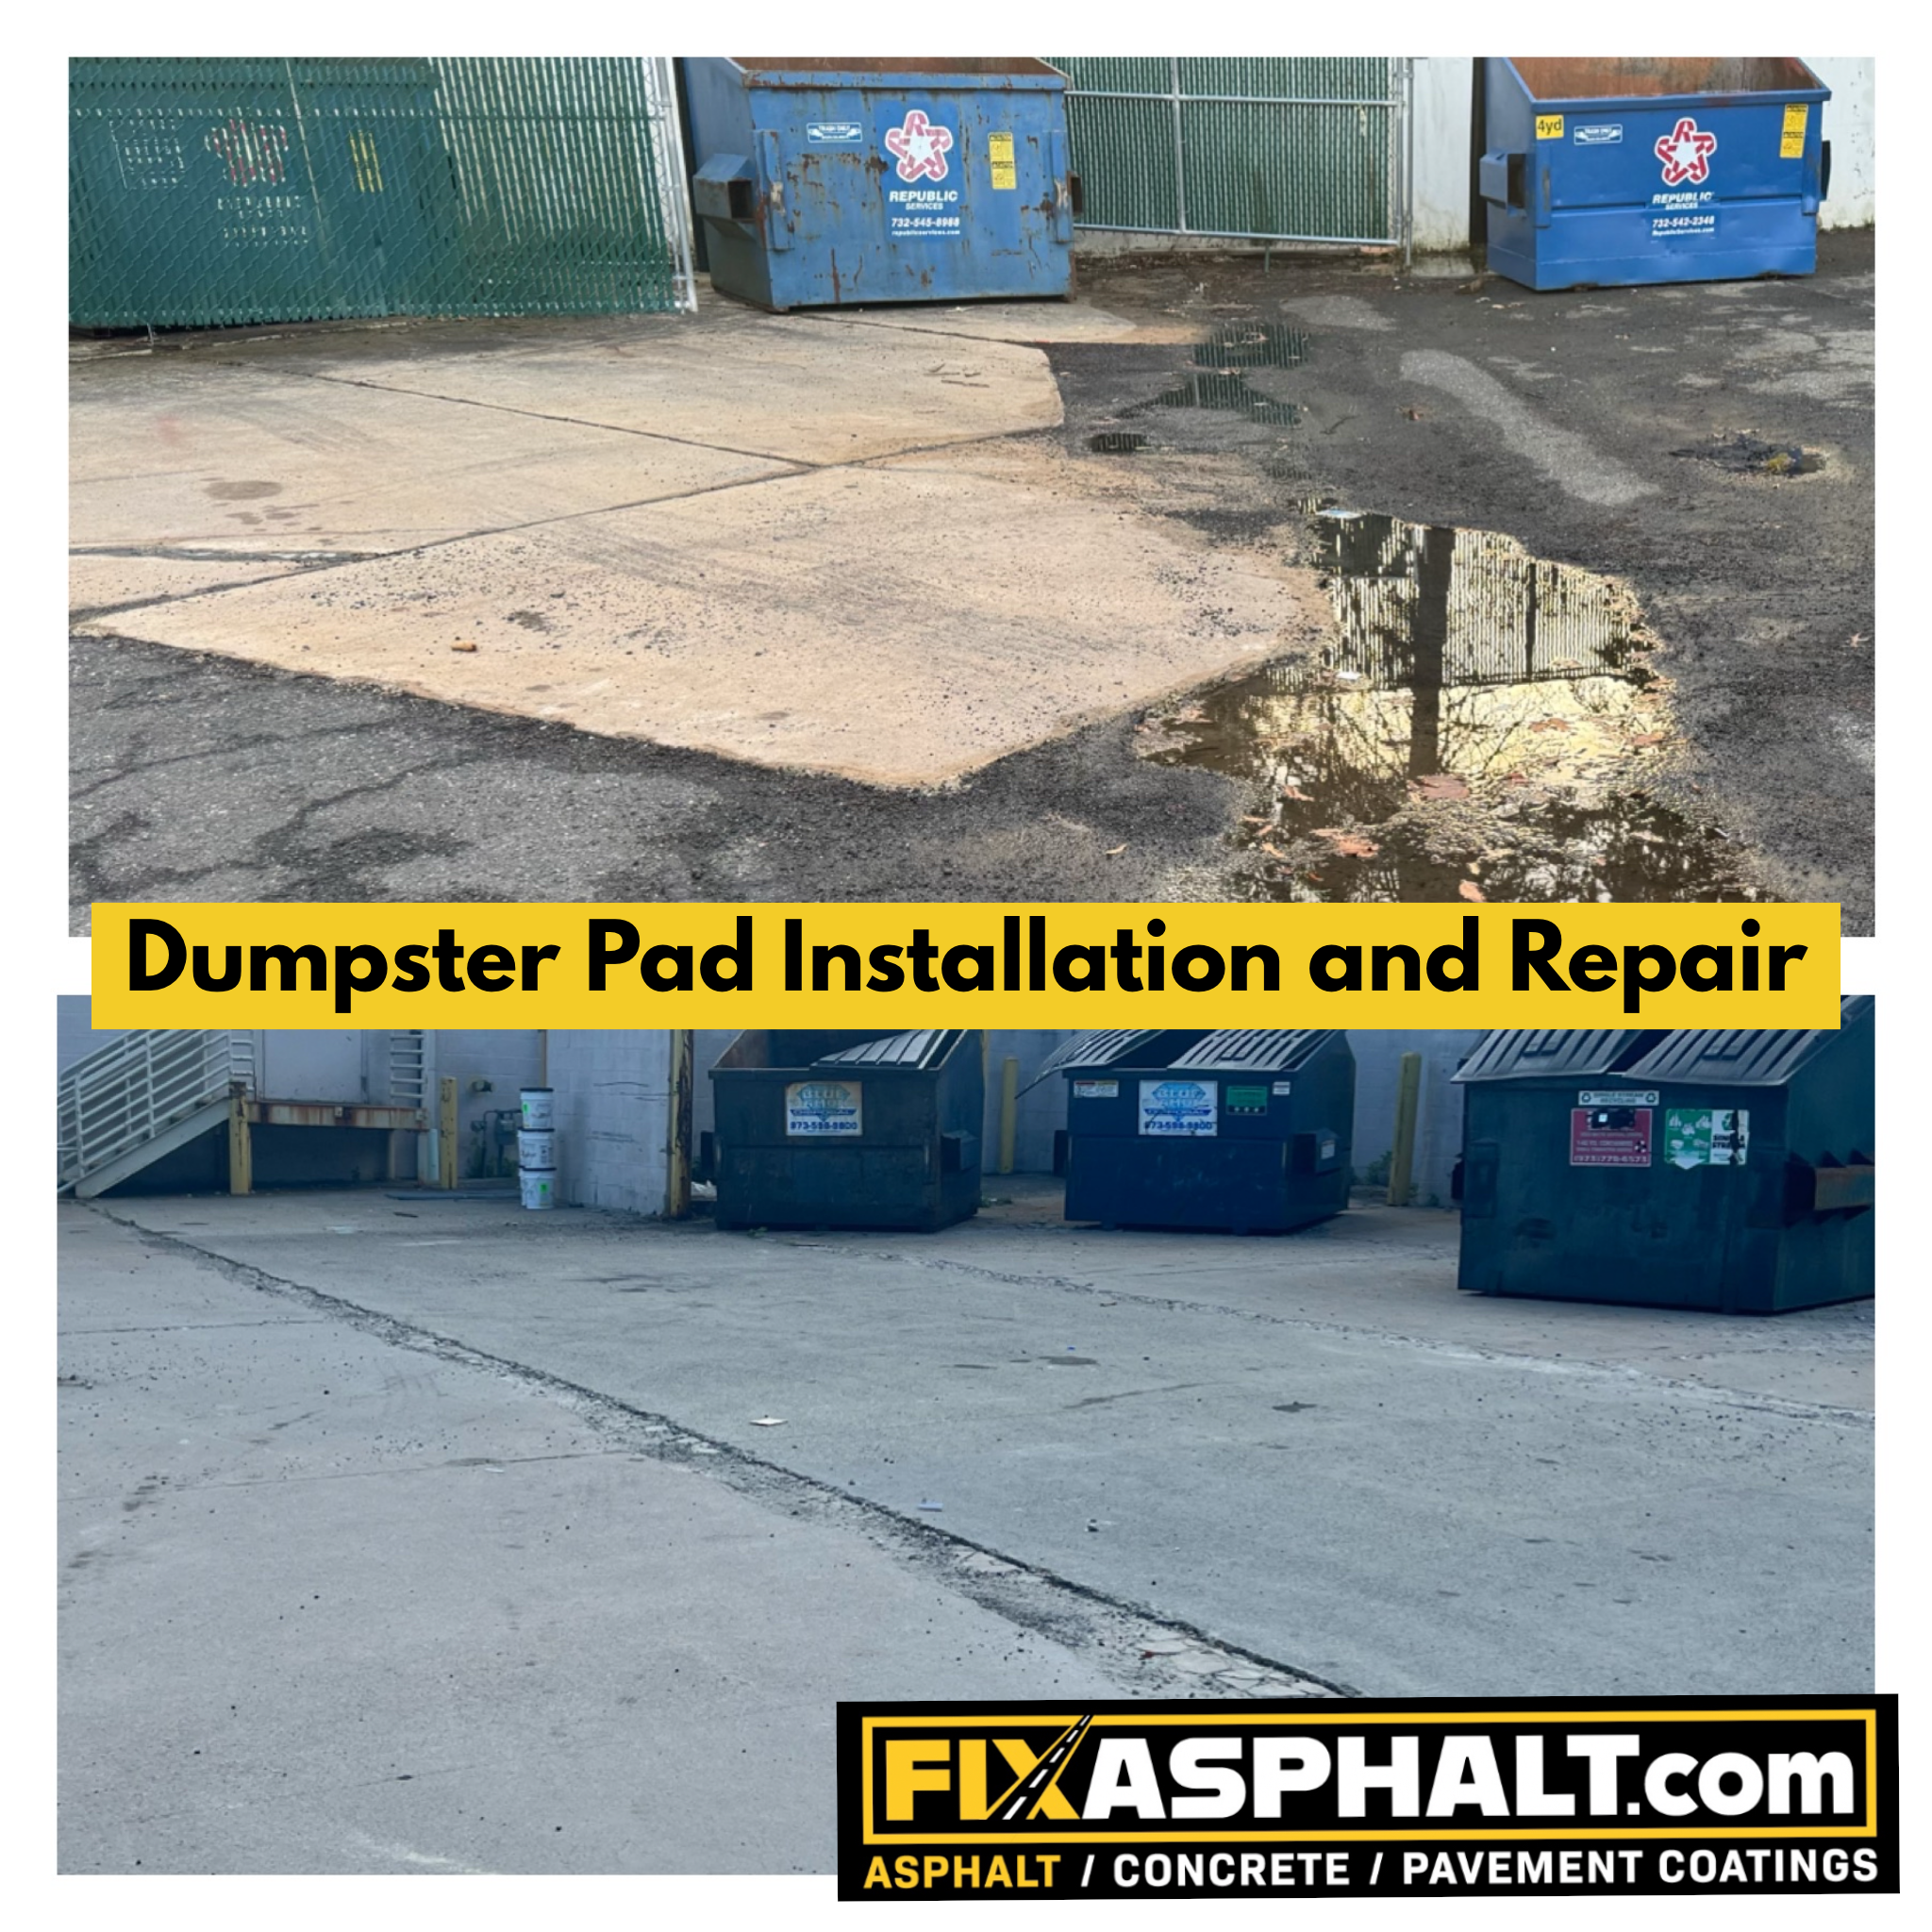 New Jersey Dumpster Pad Repair and Installation